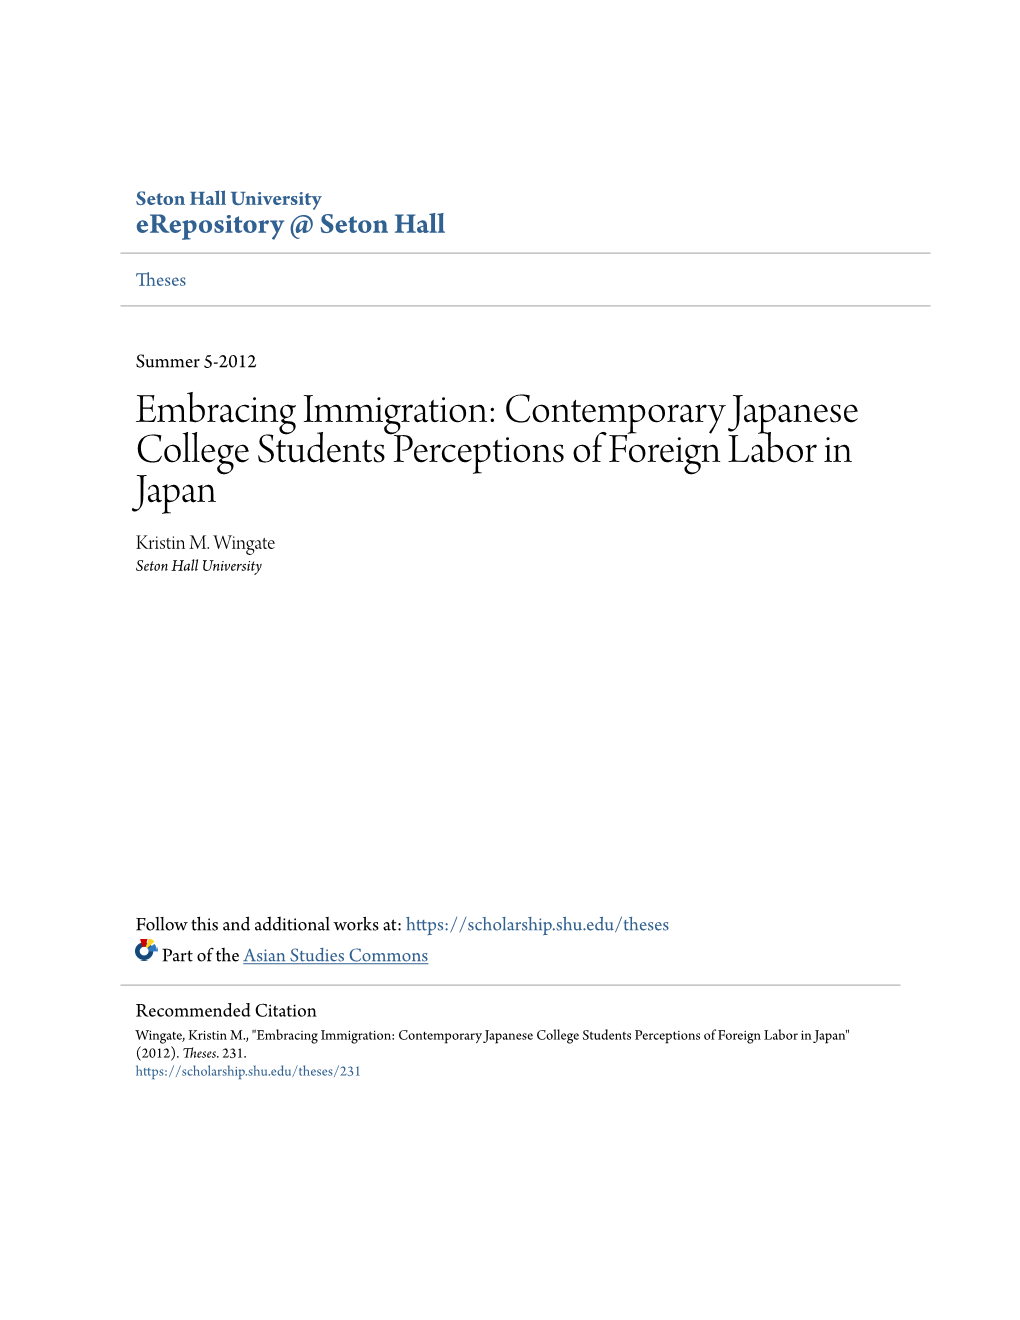 Embracing Immigration: Contemporary Japanese College Students Perceptions of Foreign Labor in Japan Kristin M